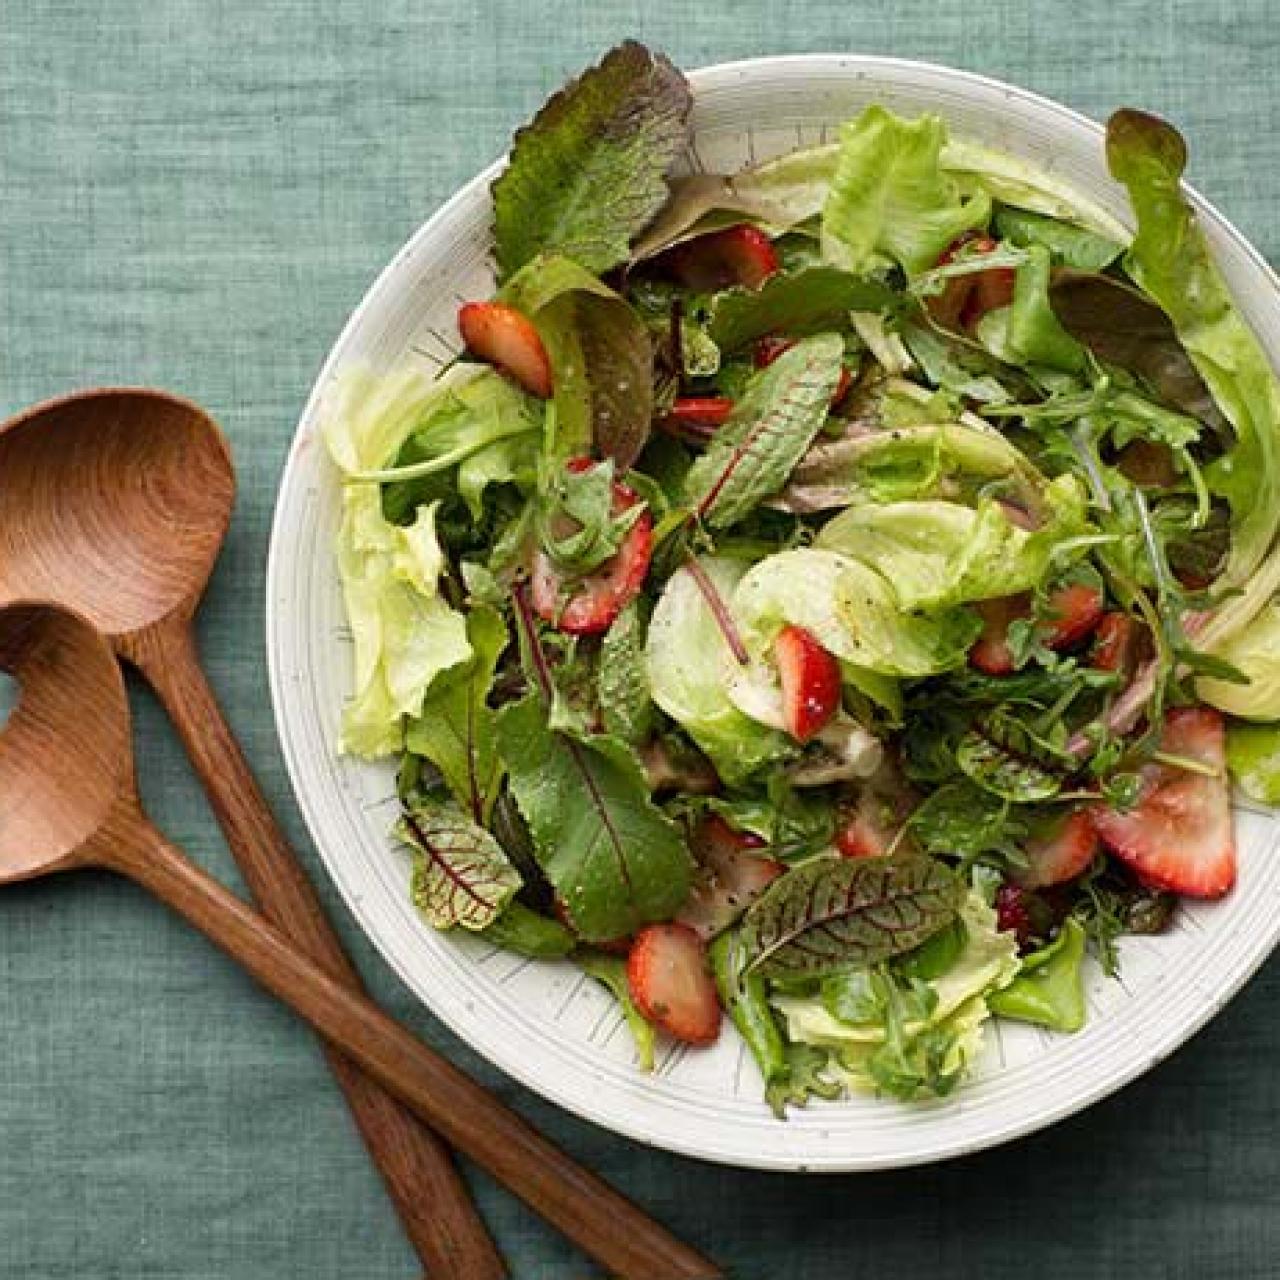 Mixed Green Salad with Berries and Strawberry Balsamic Dressing